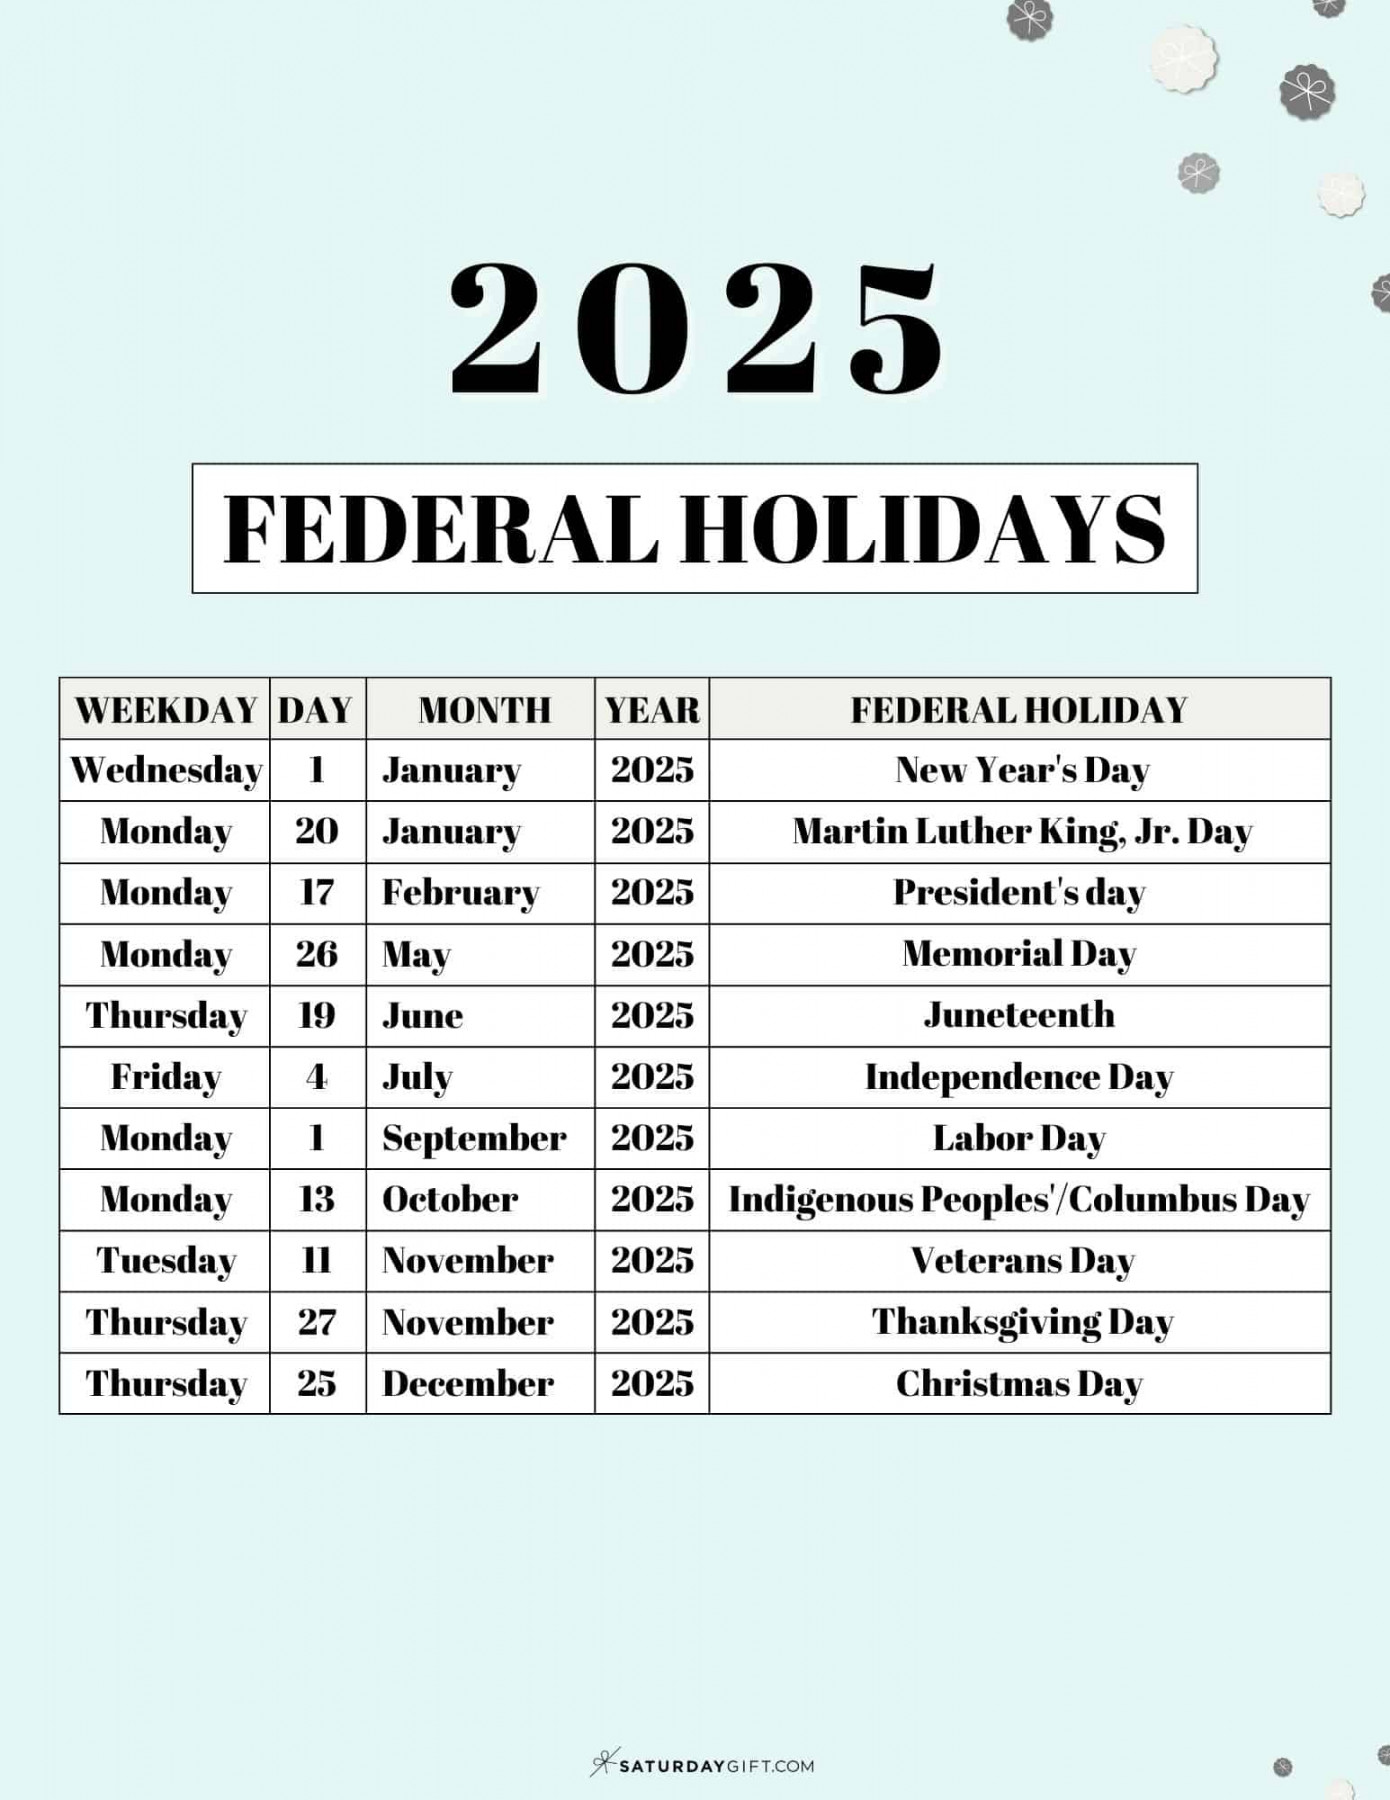 List of Federal holidays in the U.S